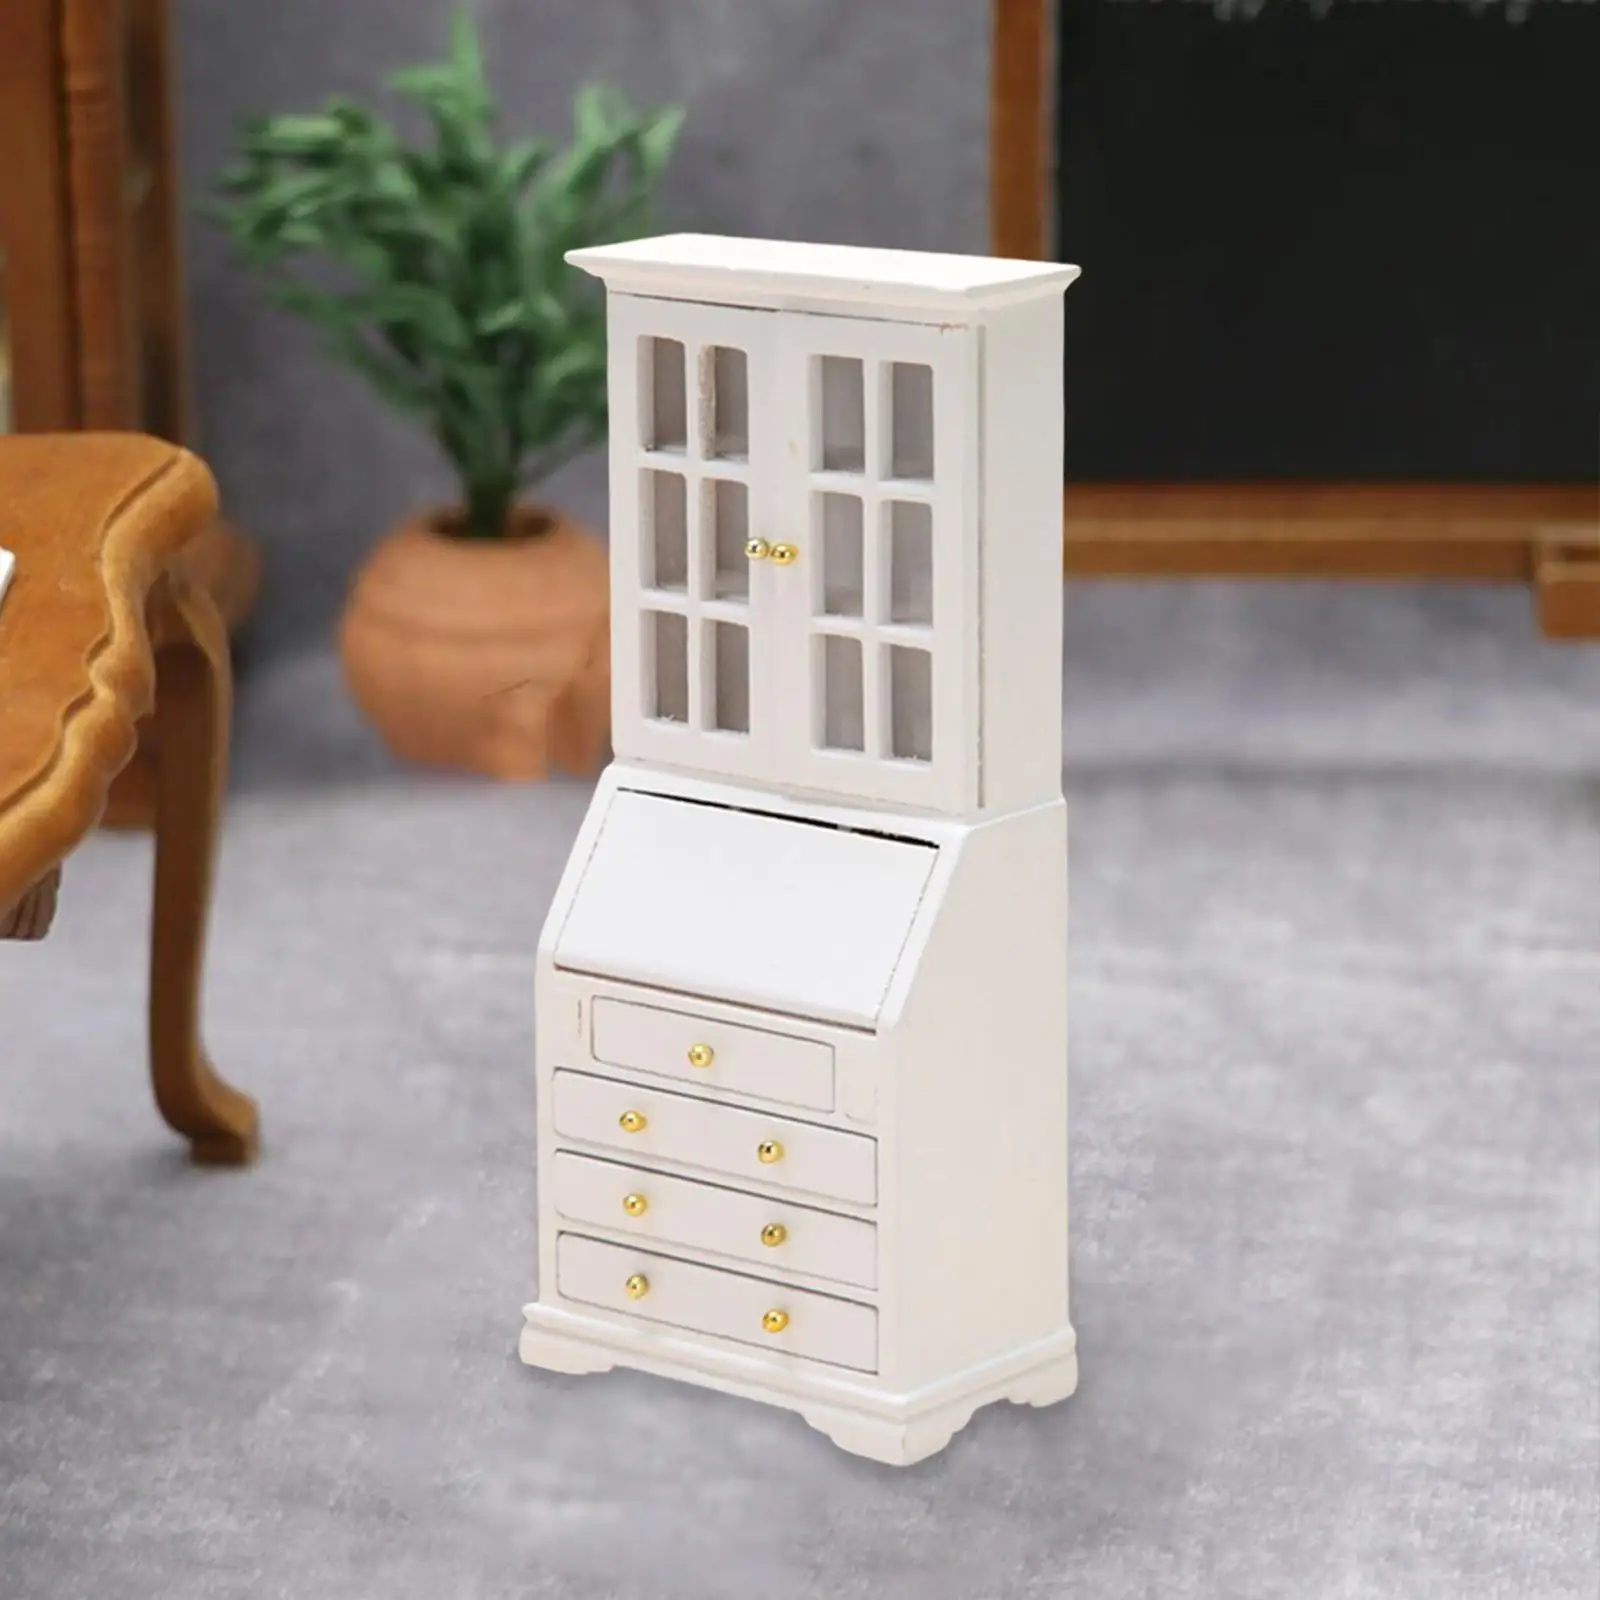 1/12 Dollhouse Bookcase Storage Cabinet Wood Furniture Professional Durable